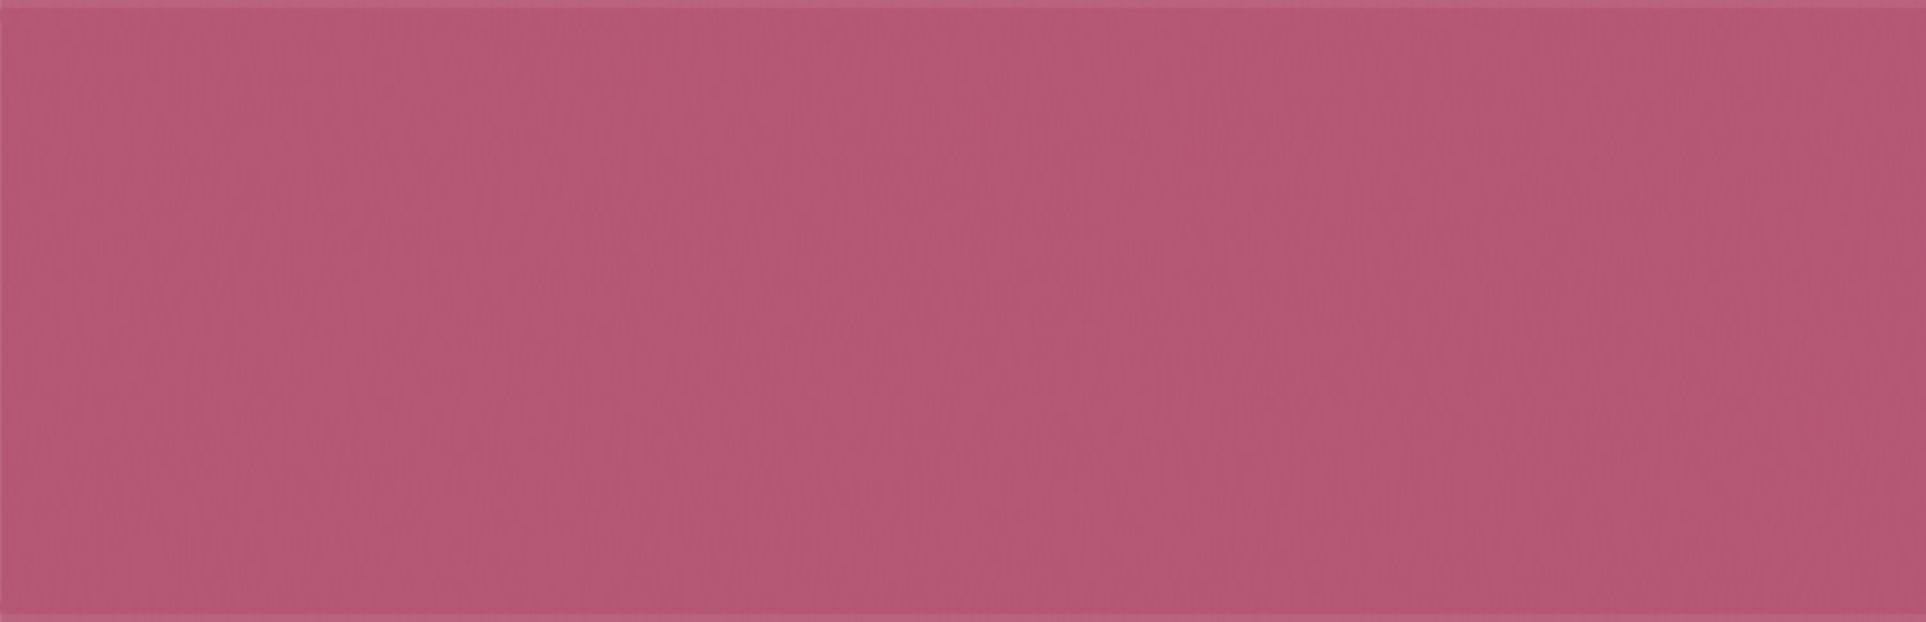 cookie policy pink banner plain colour